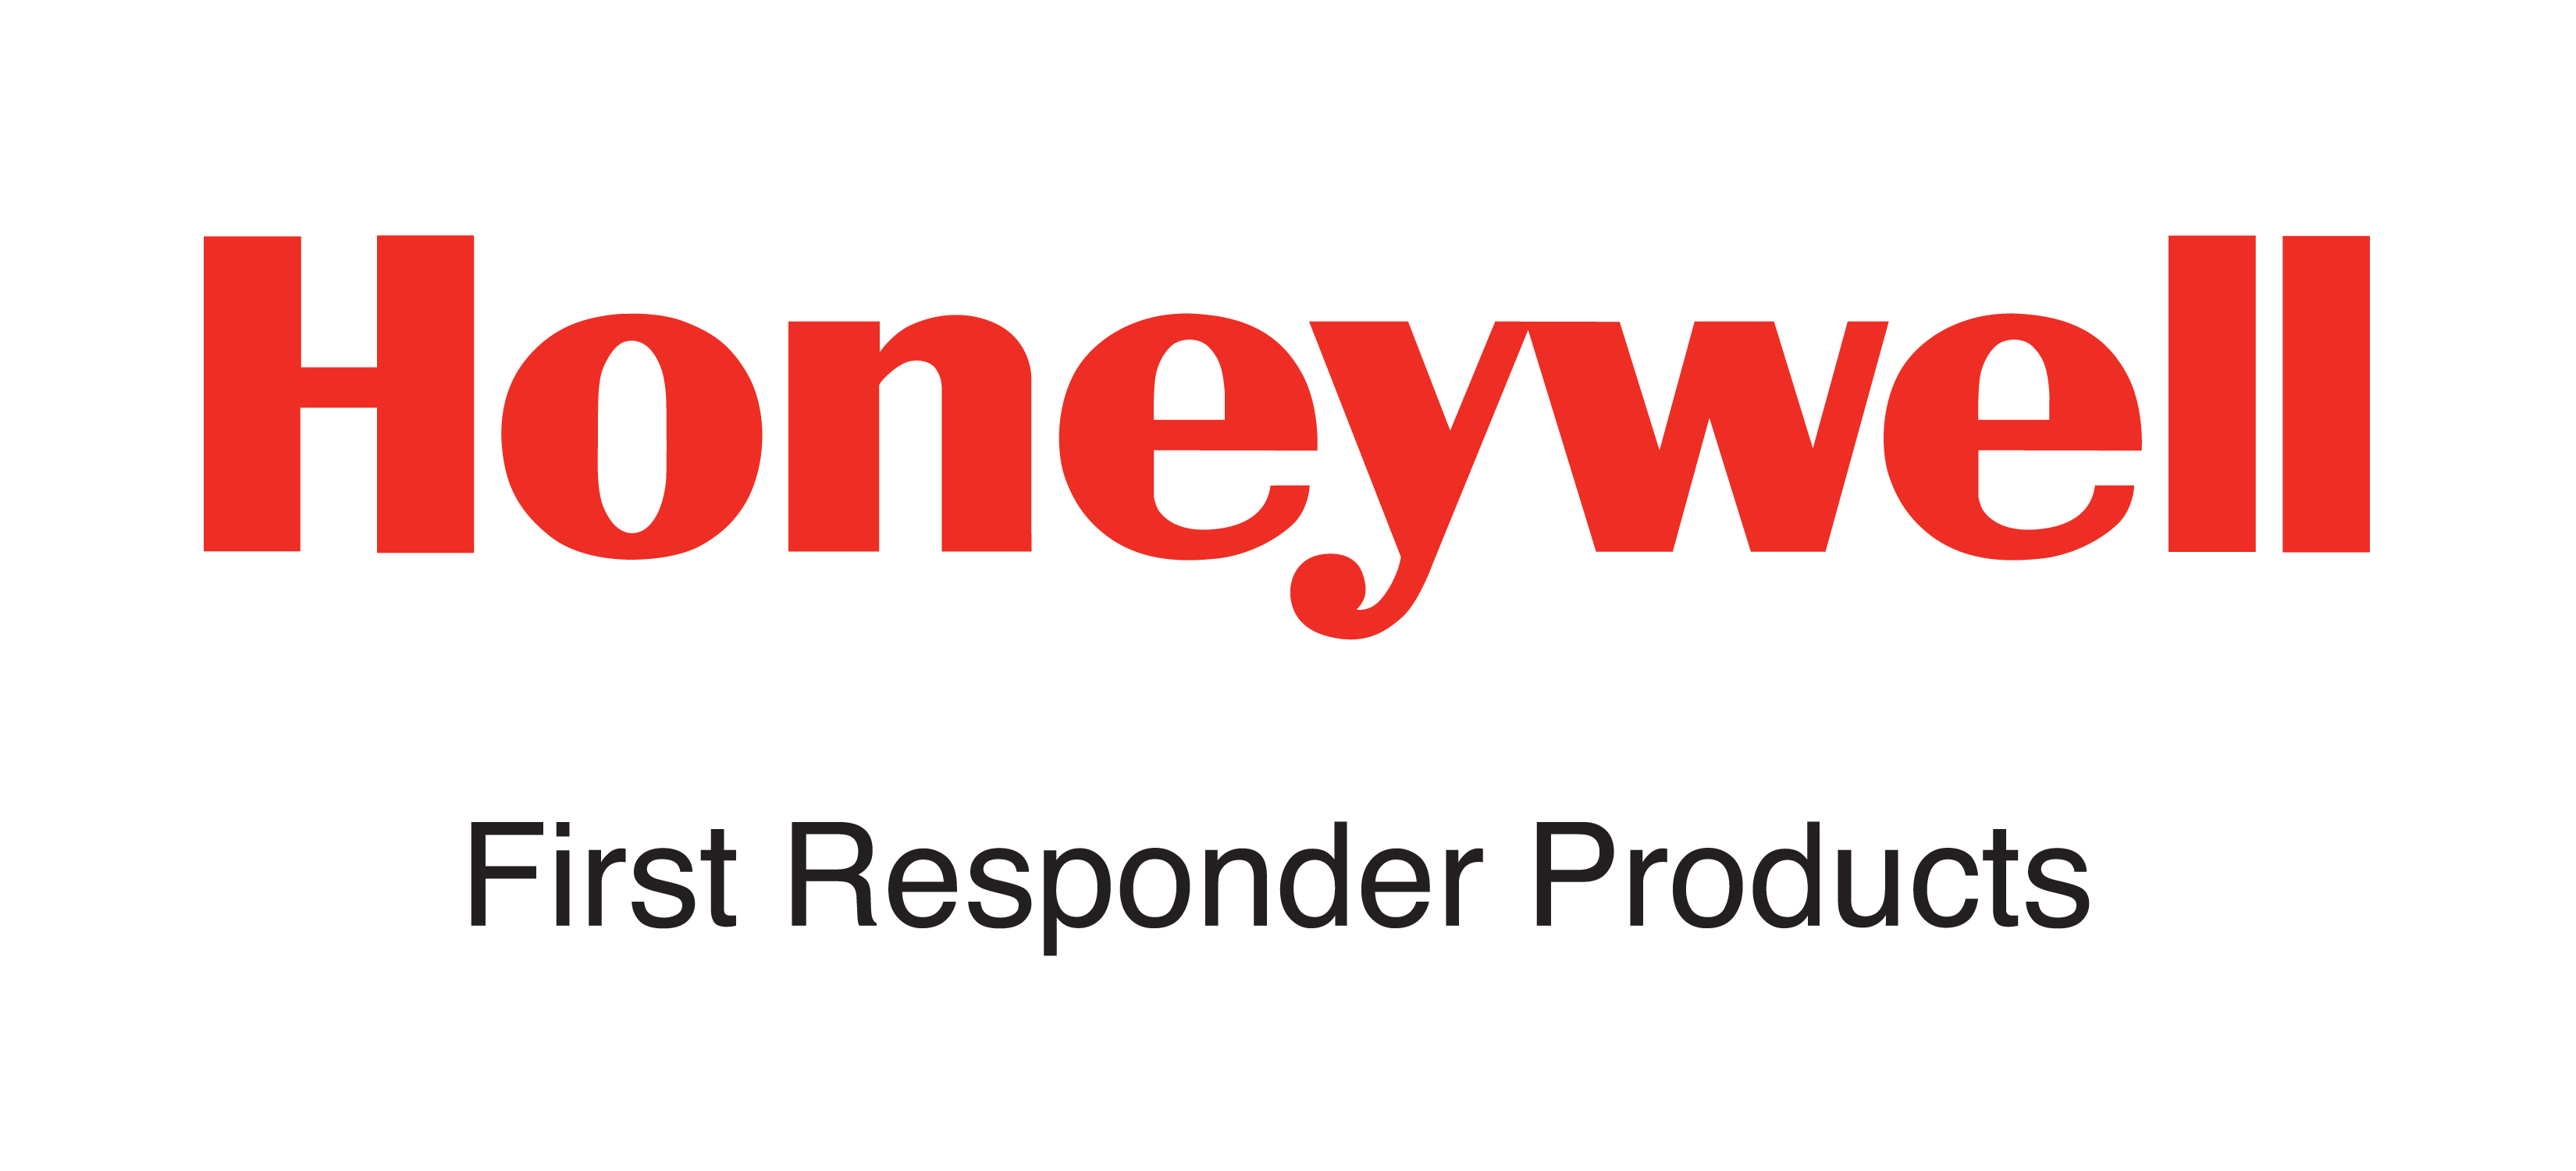 Honeywell First Responder Products